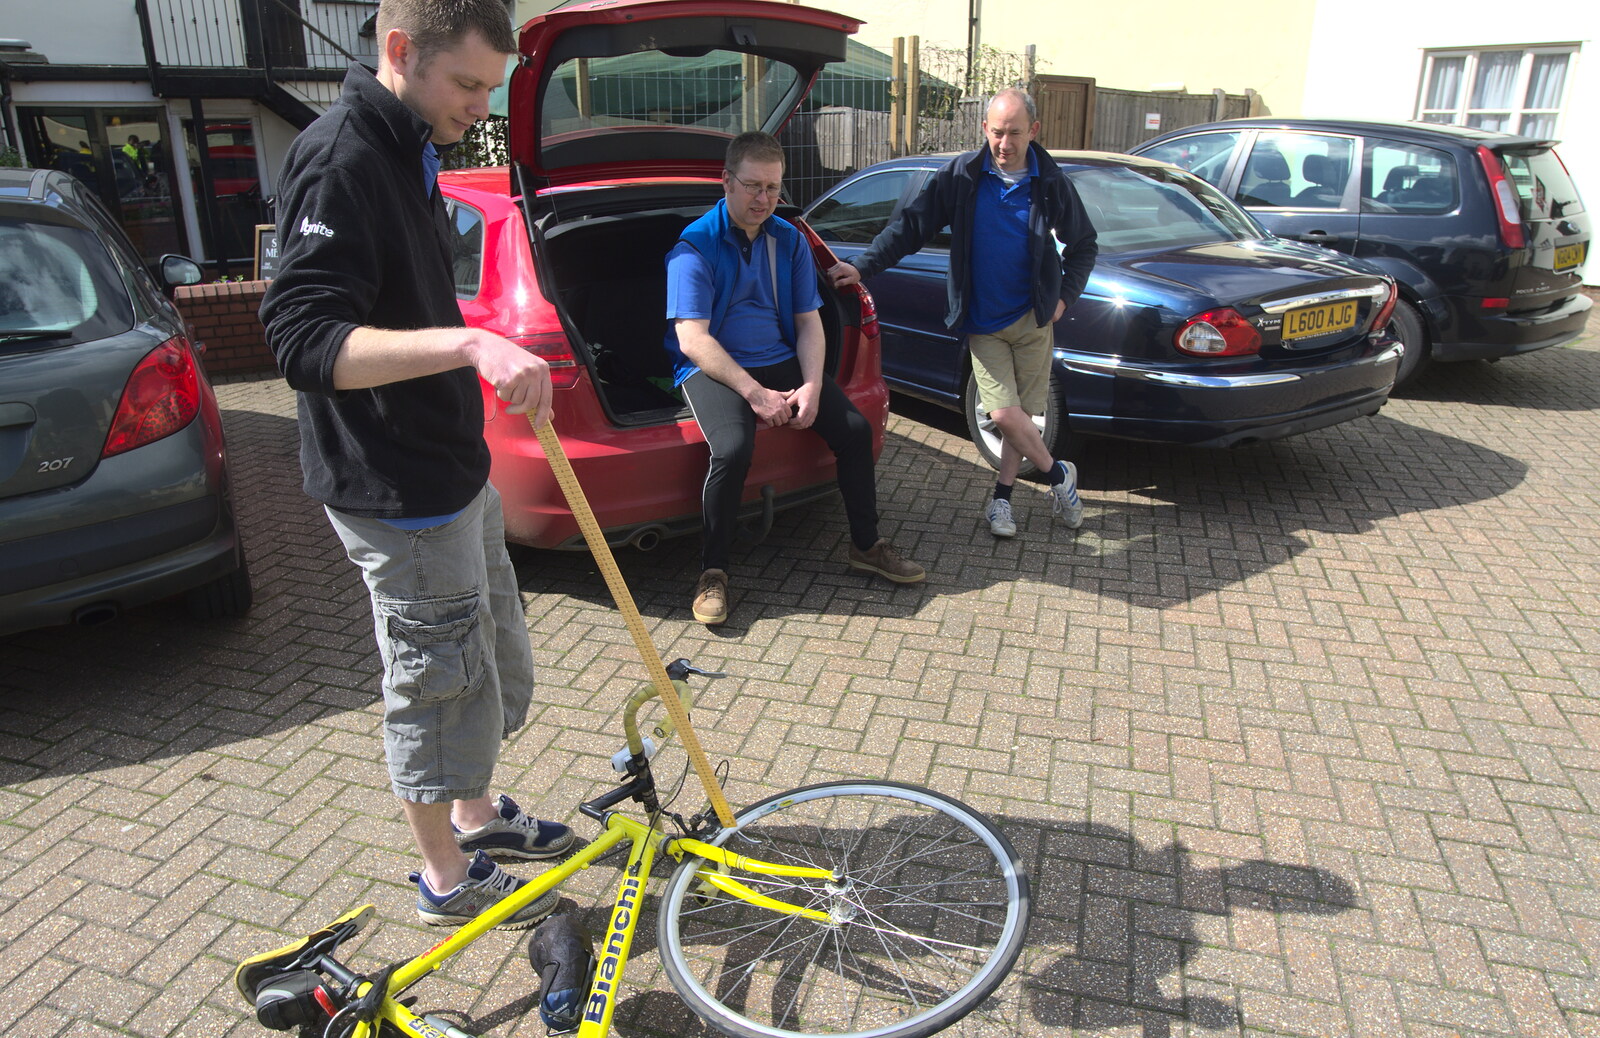 Phil pokes his bike from The BSCC Cycling Weekend, The Swan Inn, Thaxted, Essex - 12th May 2012